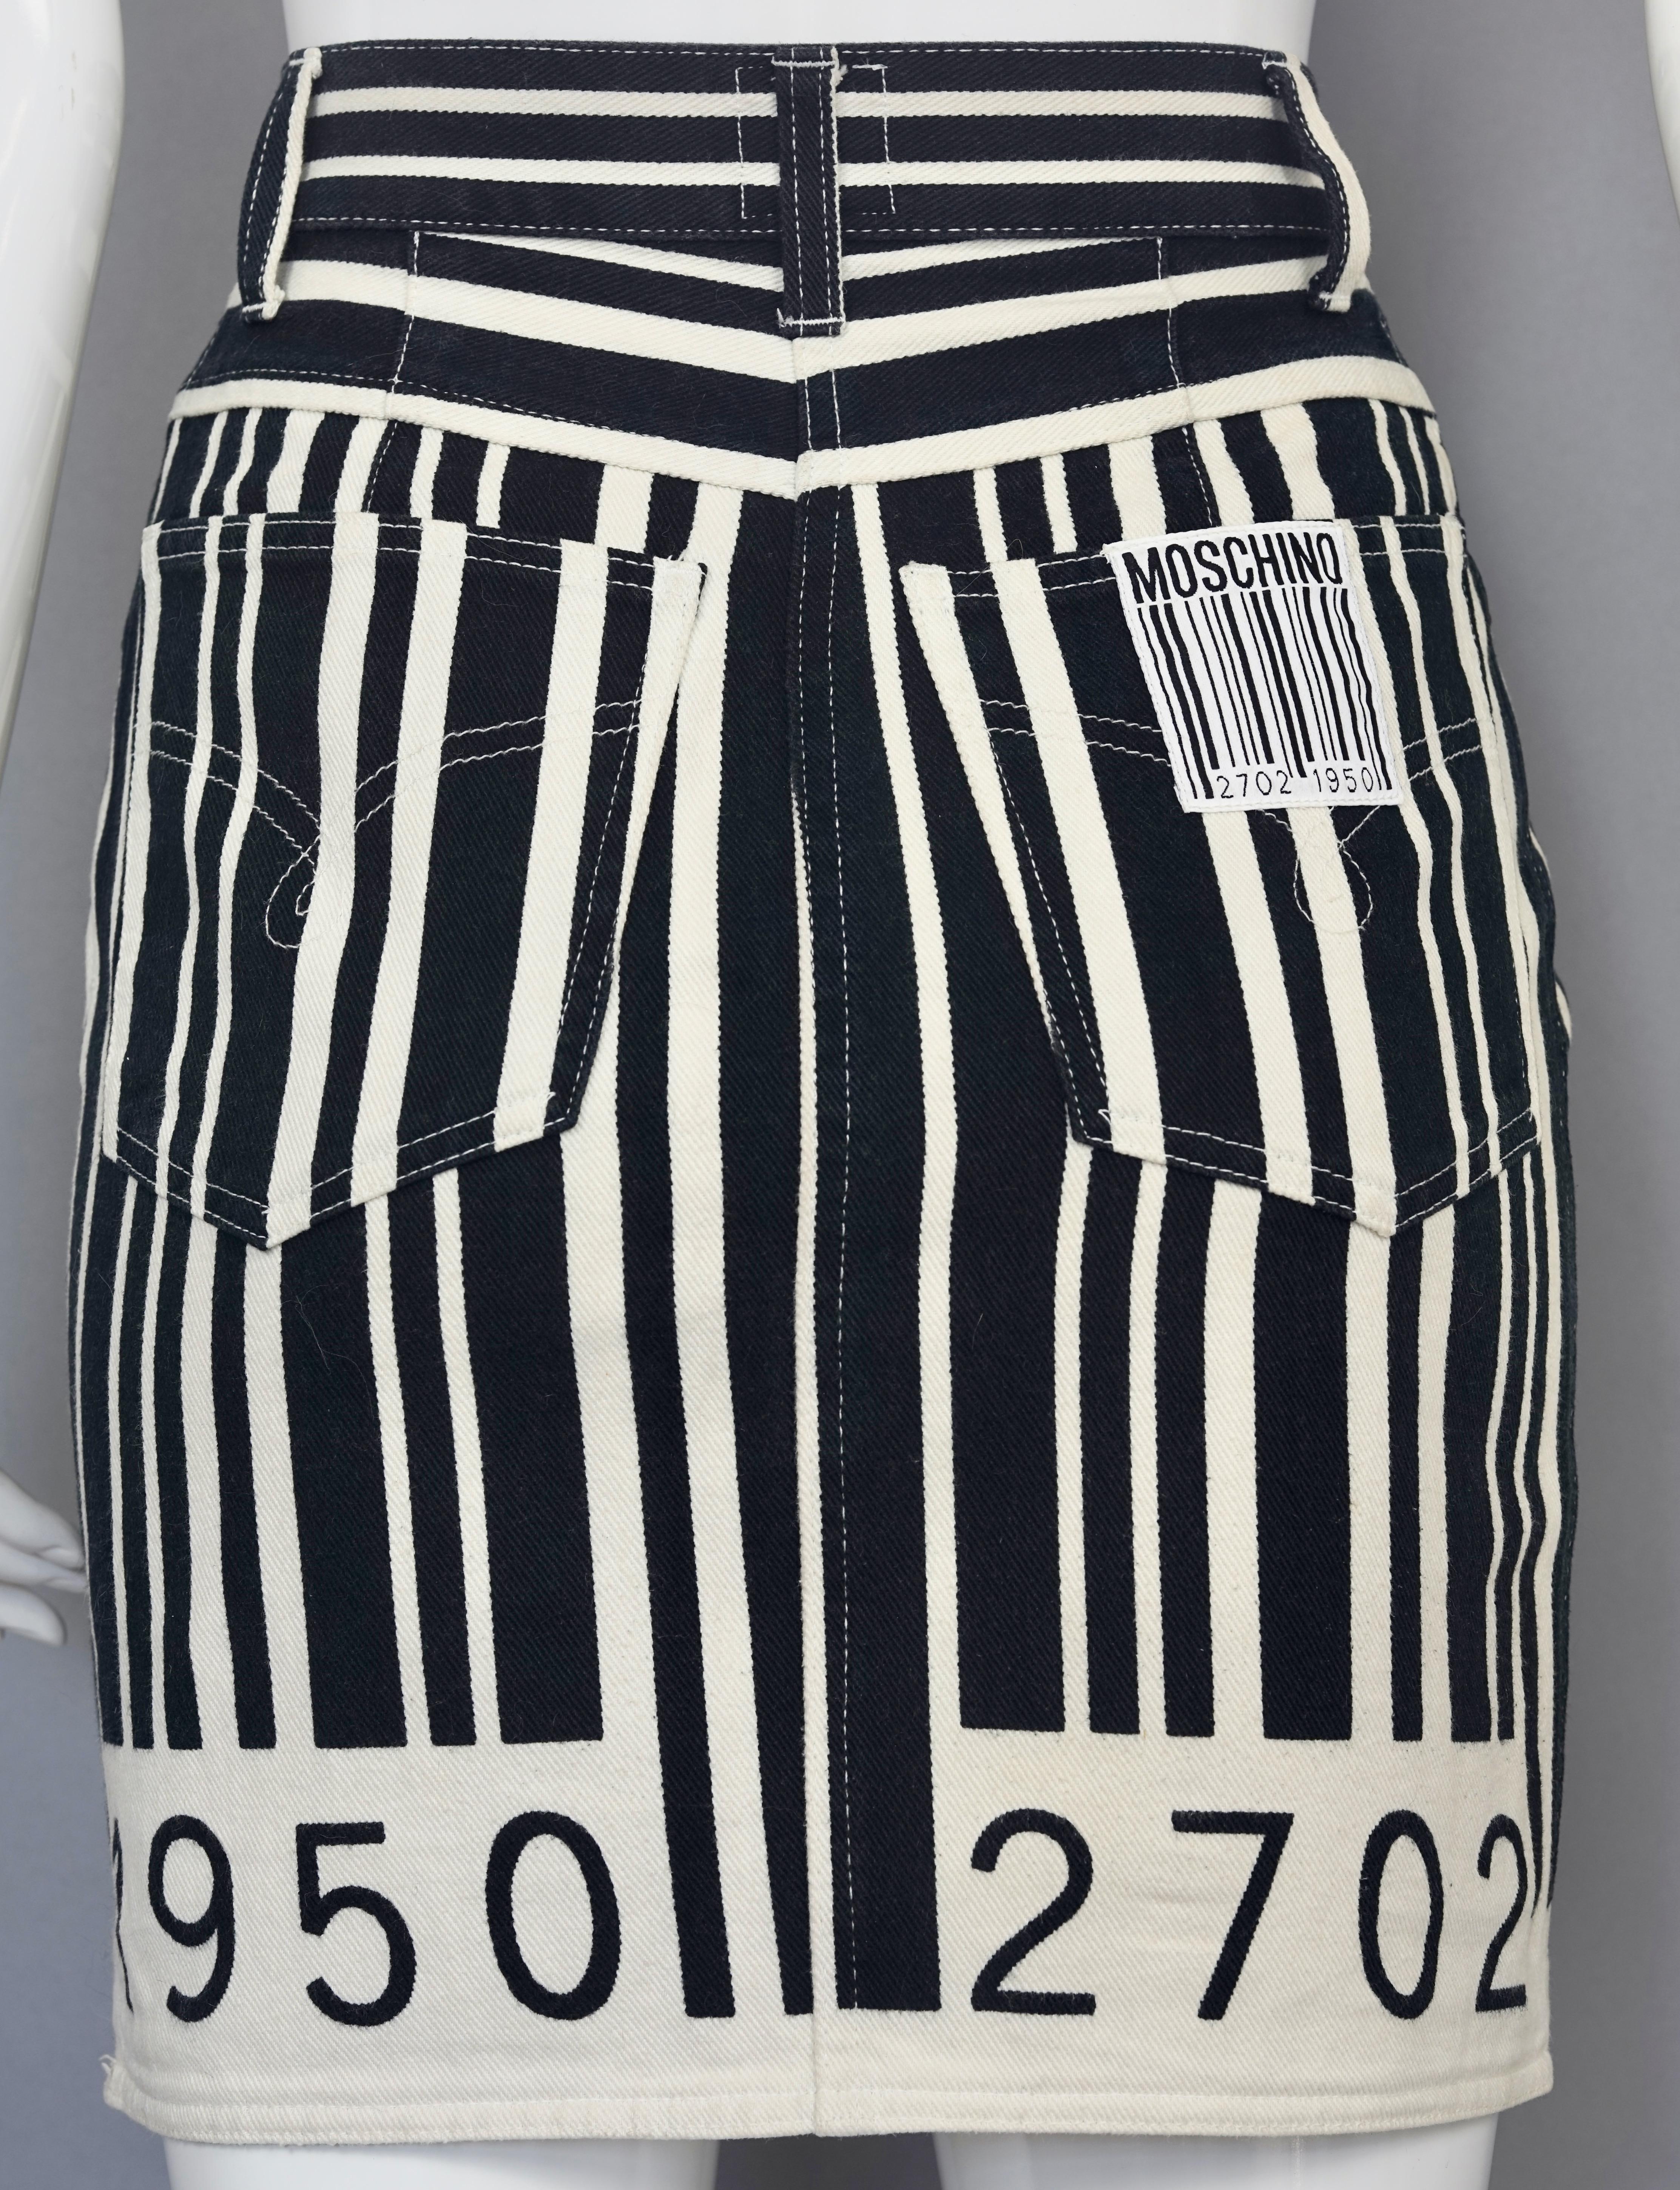 MOSCHINO Vintage MOSCHINO Barcode Novelty Skirt Skirt

Measurements taken laid flat:
Waist: 12.20 inches (31 cm)
Hips: 17.71 inches (45 cm)
Length: 17.71 inches (45 cm)

Features:
- 100% Authentic MOSCHINO JEANS.
- Barcode print skirt in black and